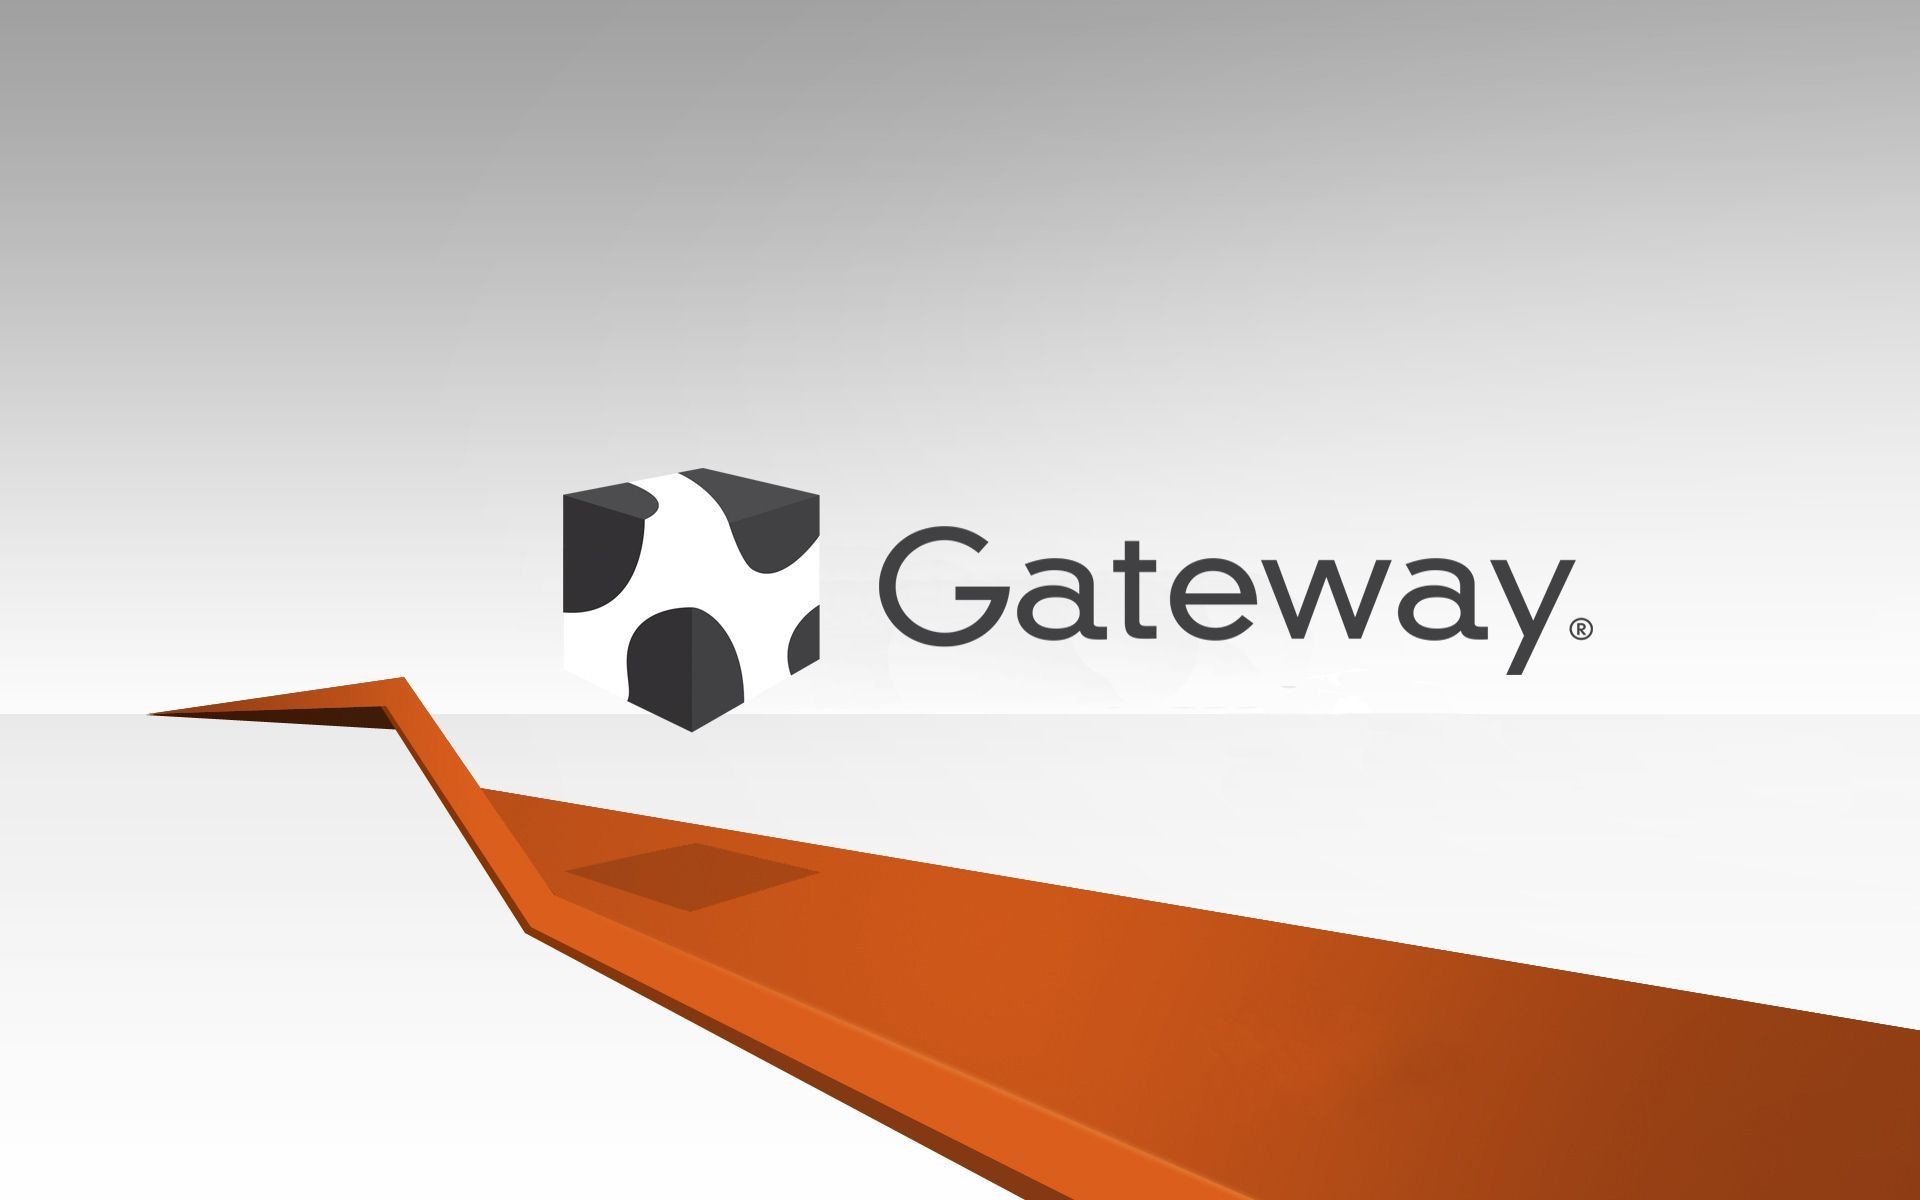 1920x1200 Gallery For: Gateway Wallpapers, Gateway Wallpapers, Top 37 HQ .